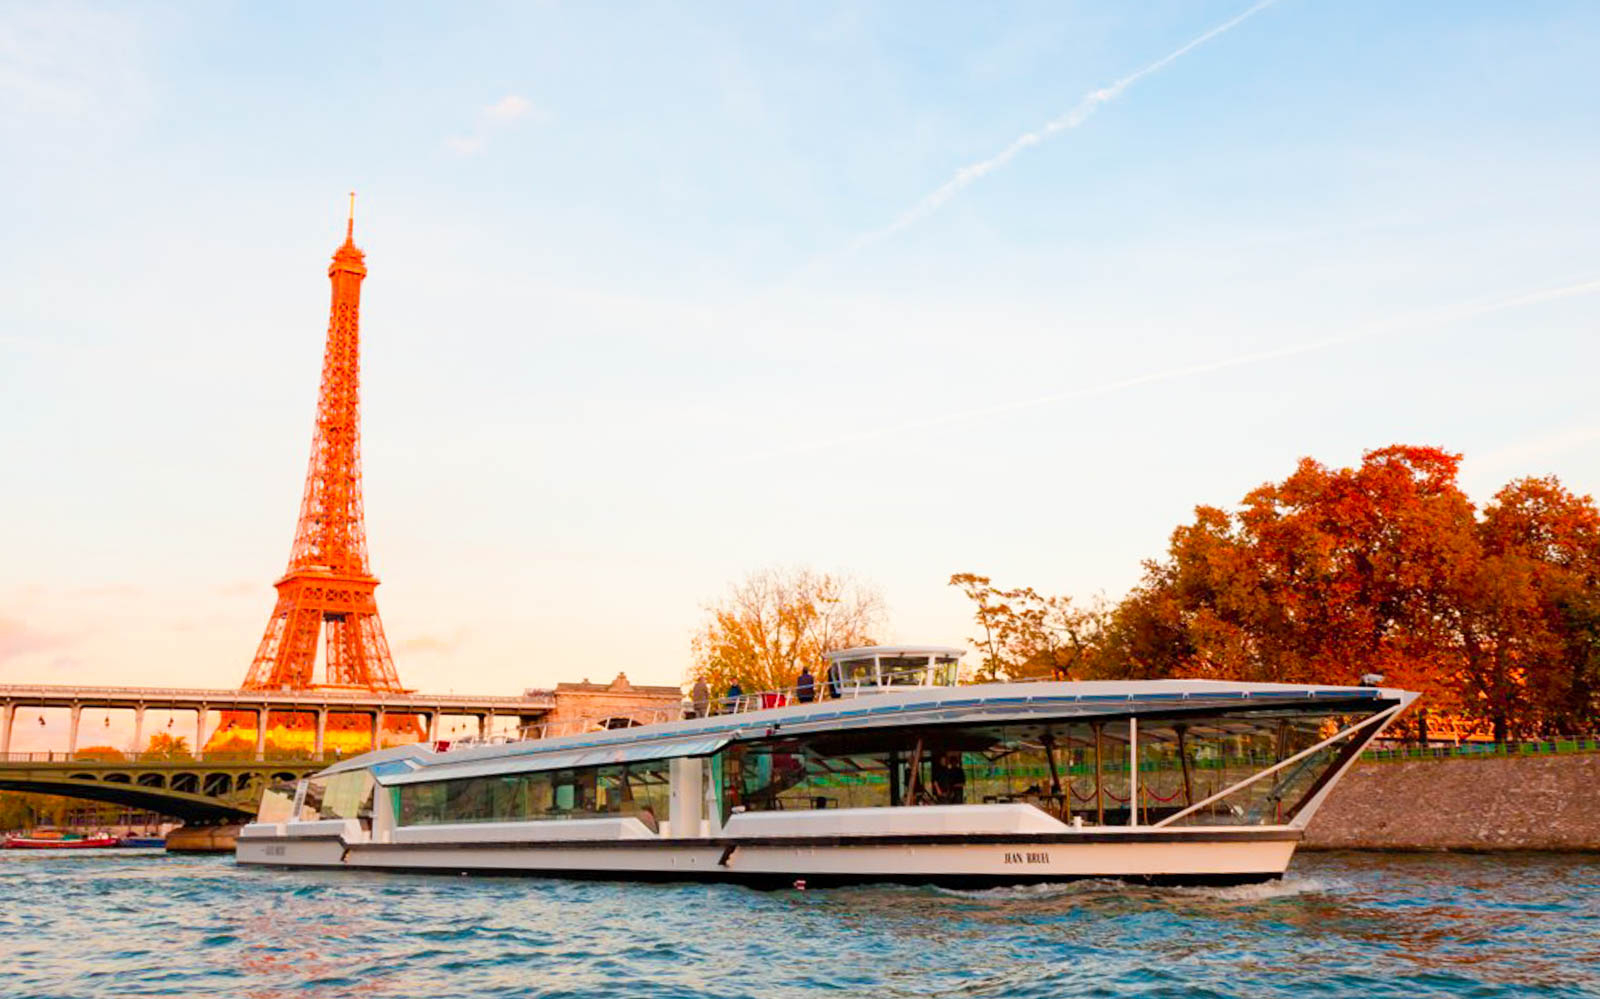 Image of Bateaux Mouches Seine River Lunch Cruise with Live Music